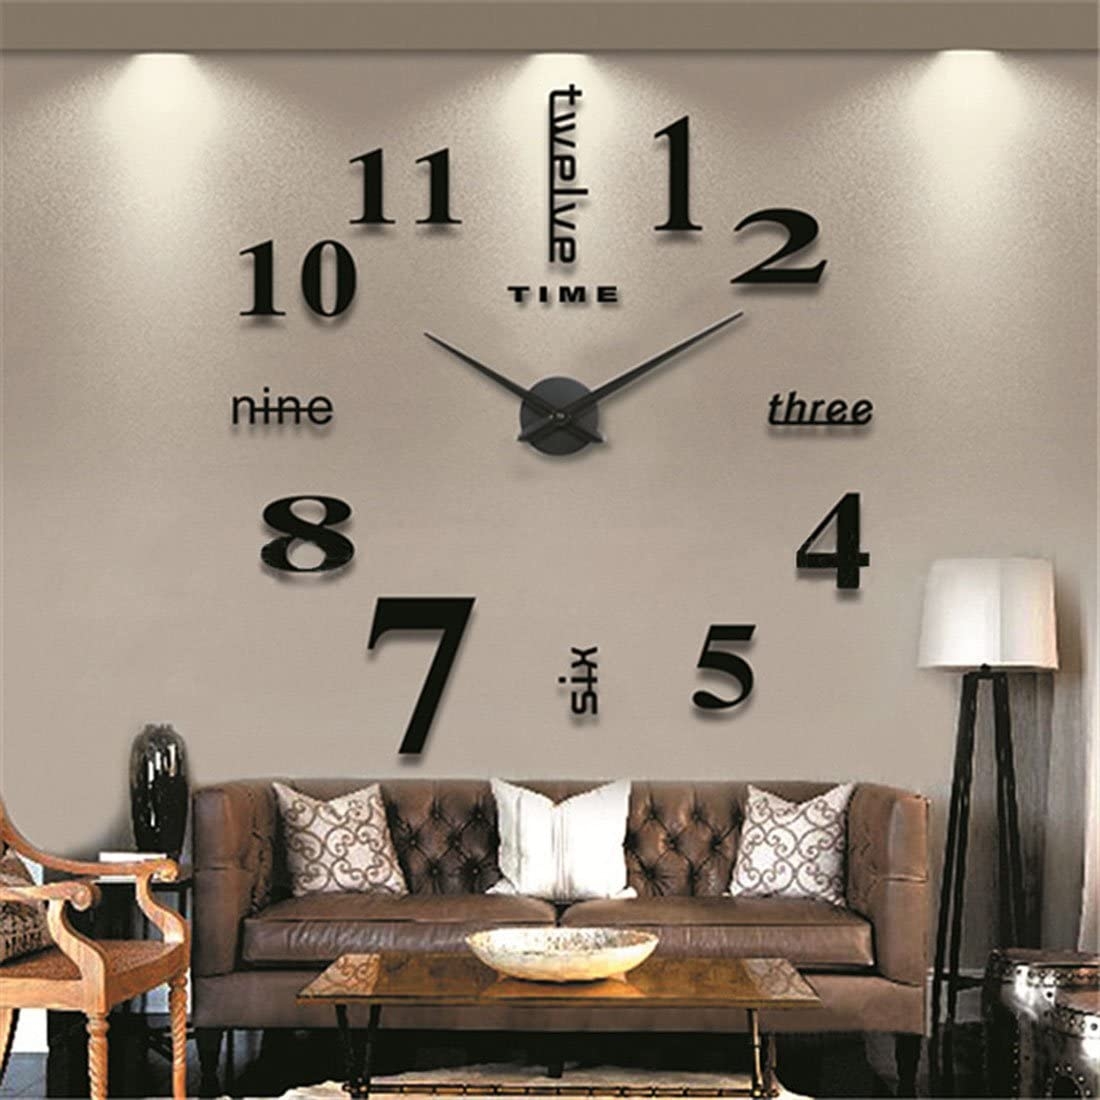 iCasso Luxury Large Size 3D Mirror Surface Creative Modern Home Decoration Art Clock DIY Wall Clock Watches Hours Wall Sticker #6 (Black)